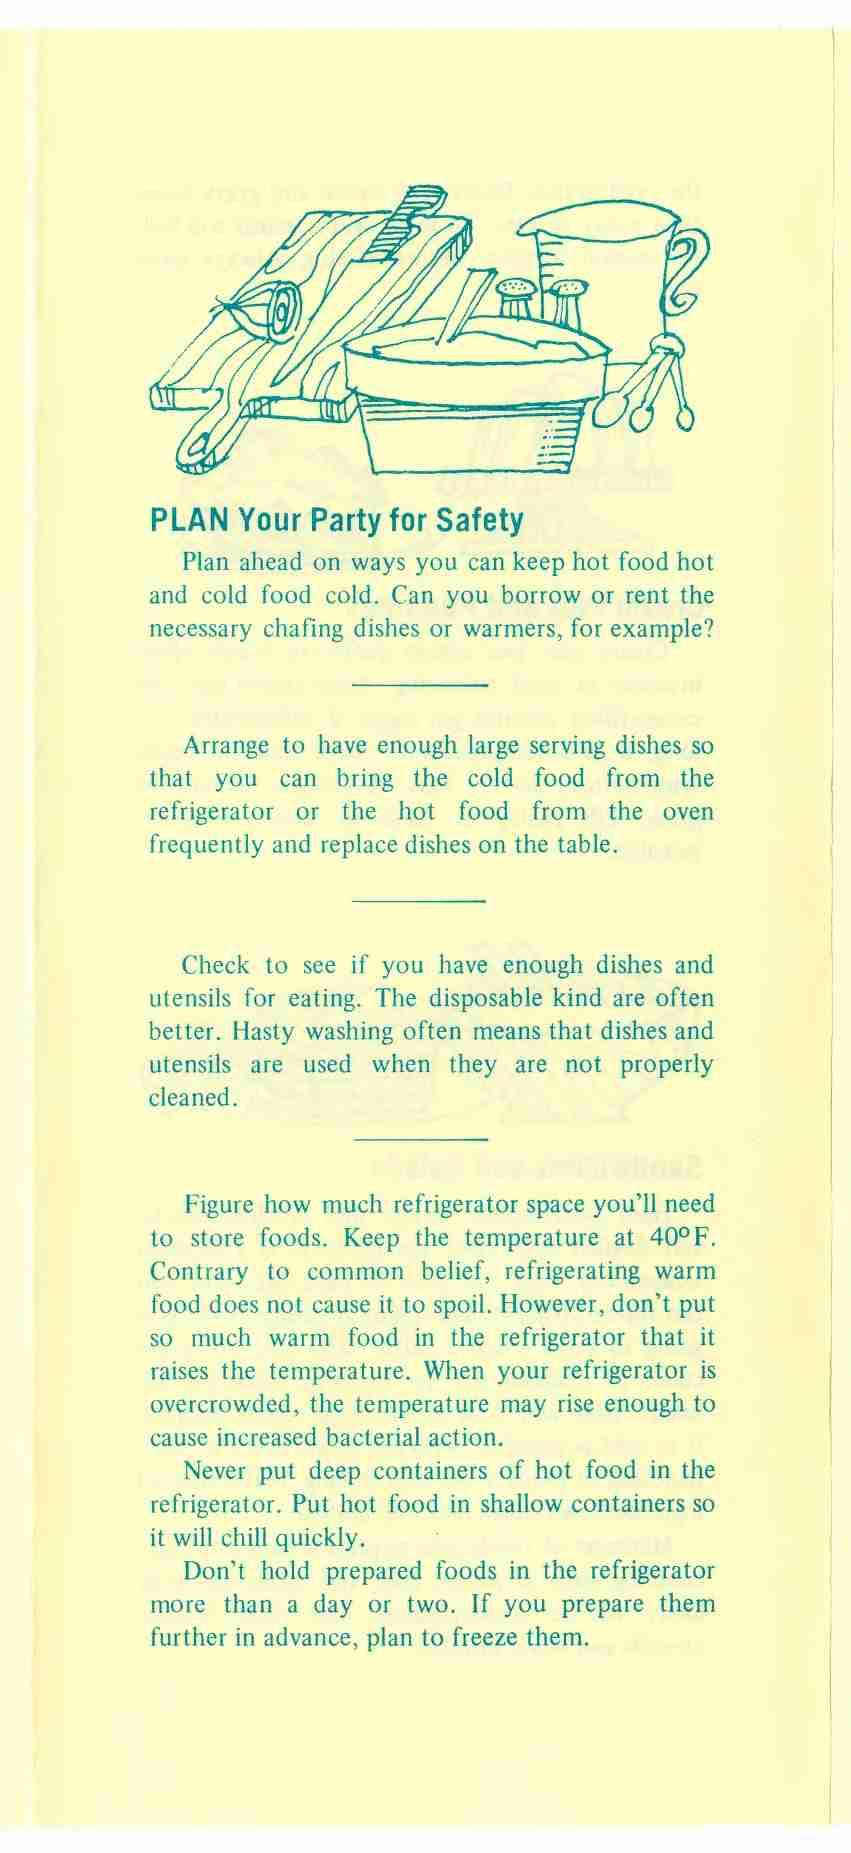 PLAN Your Party for Safety Plan ahead on ways you can keep hot food hot and cold food cold. Can you borrow or rent the necessary chafing dishes or warmers, for example?